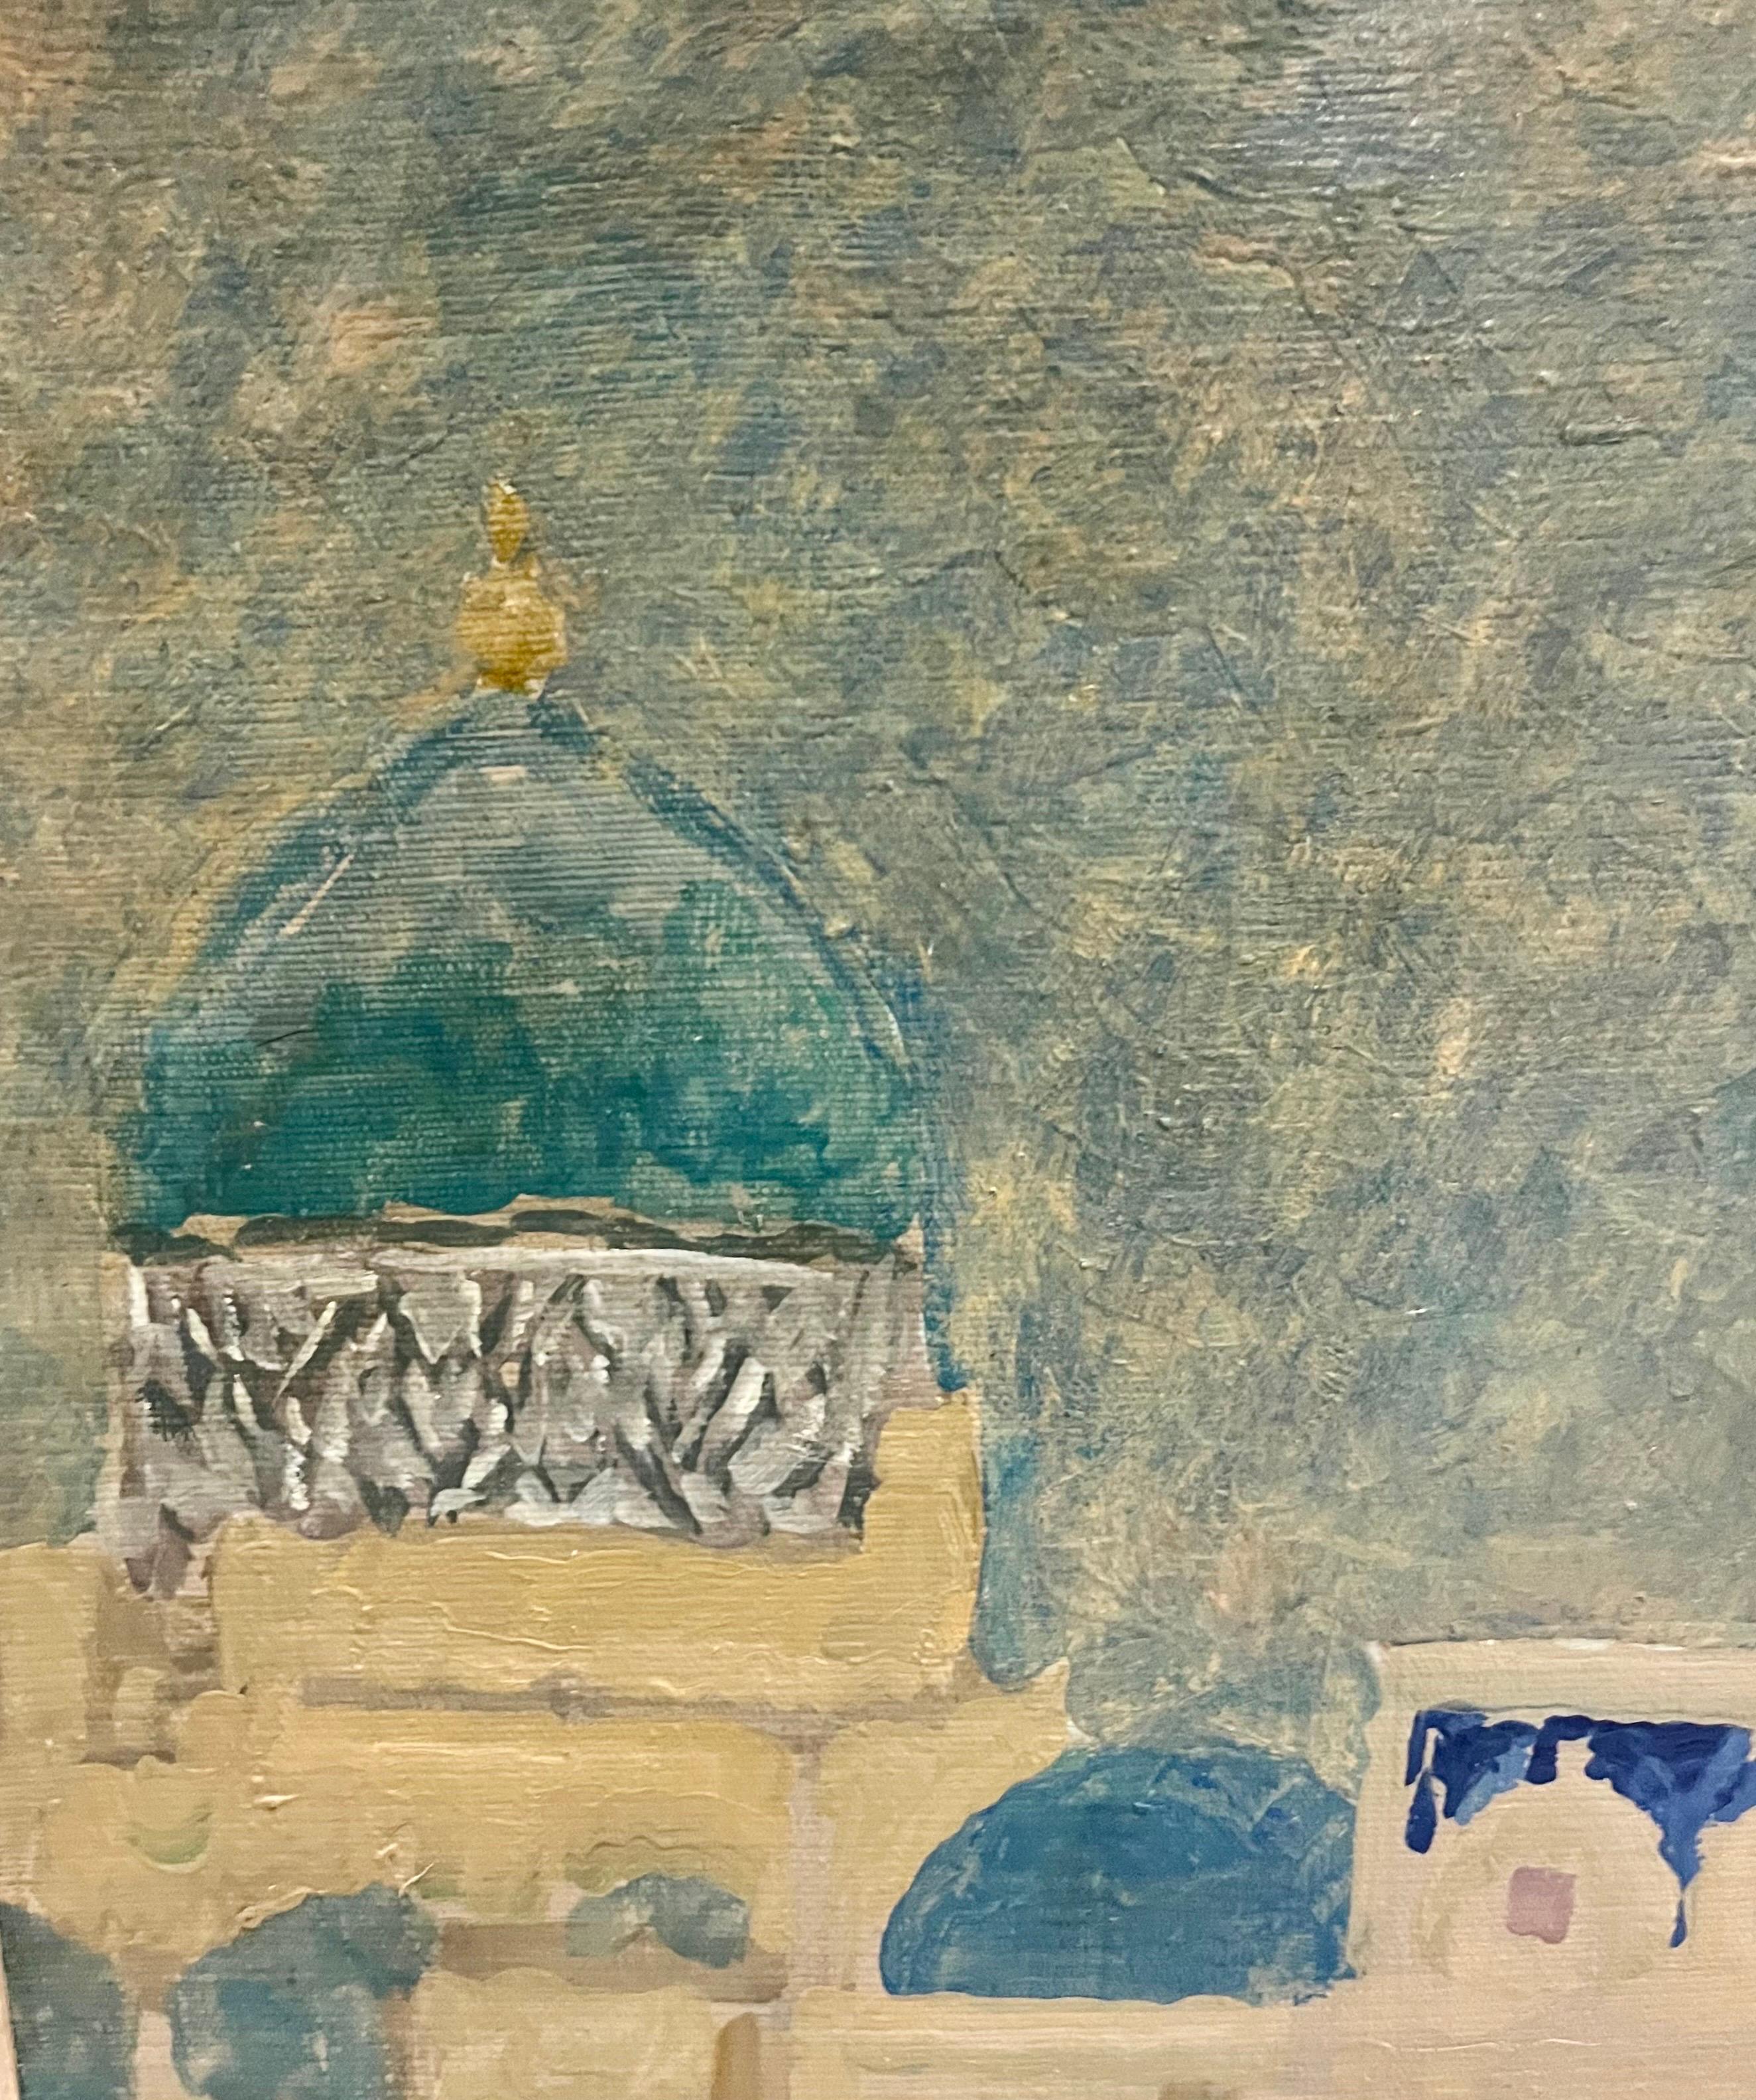 Middle East landscape, , Blue and turquoise mosques Uzbekistan, Khiva
Dmitrij KOSMIN (Omsk, 1925 – Moscow, 2003)

Dmitrij Kosmin has represented the Soviet Union at the Biennale of Venice in 1966.
Works by Dmitrij Kosmin can be found in various